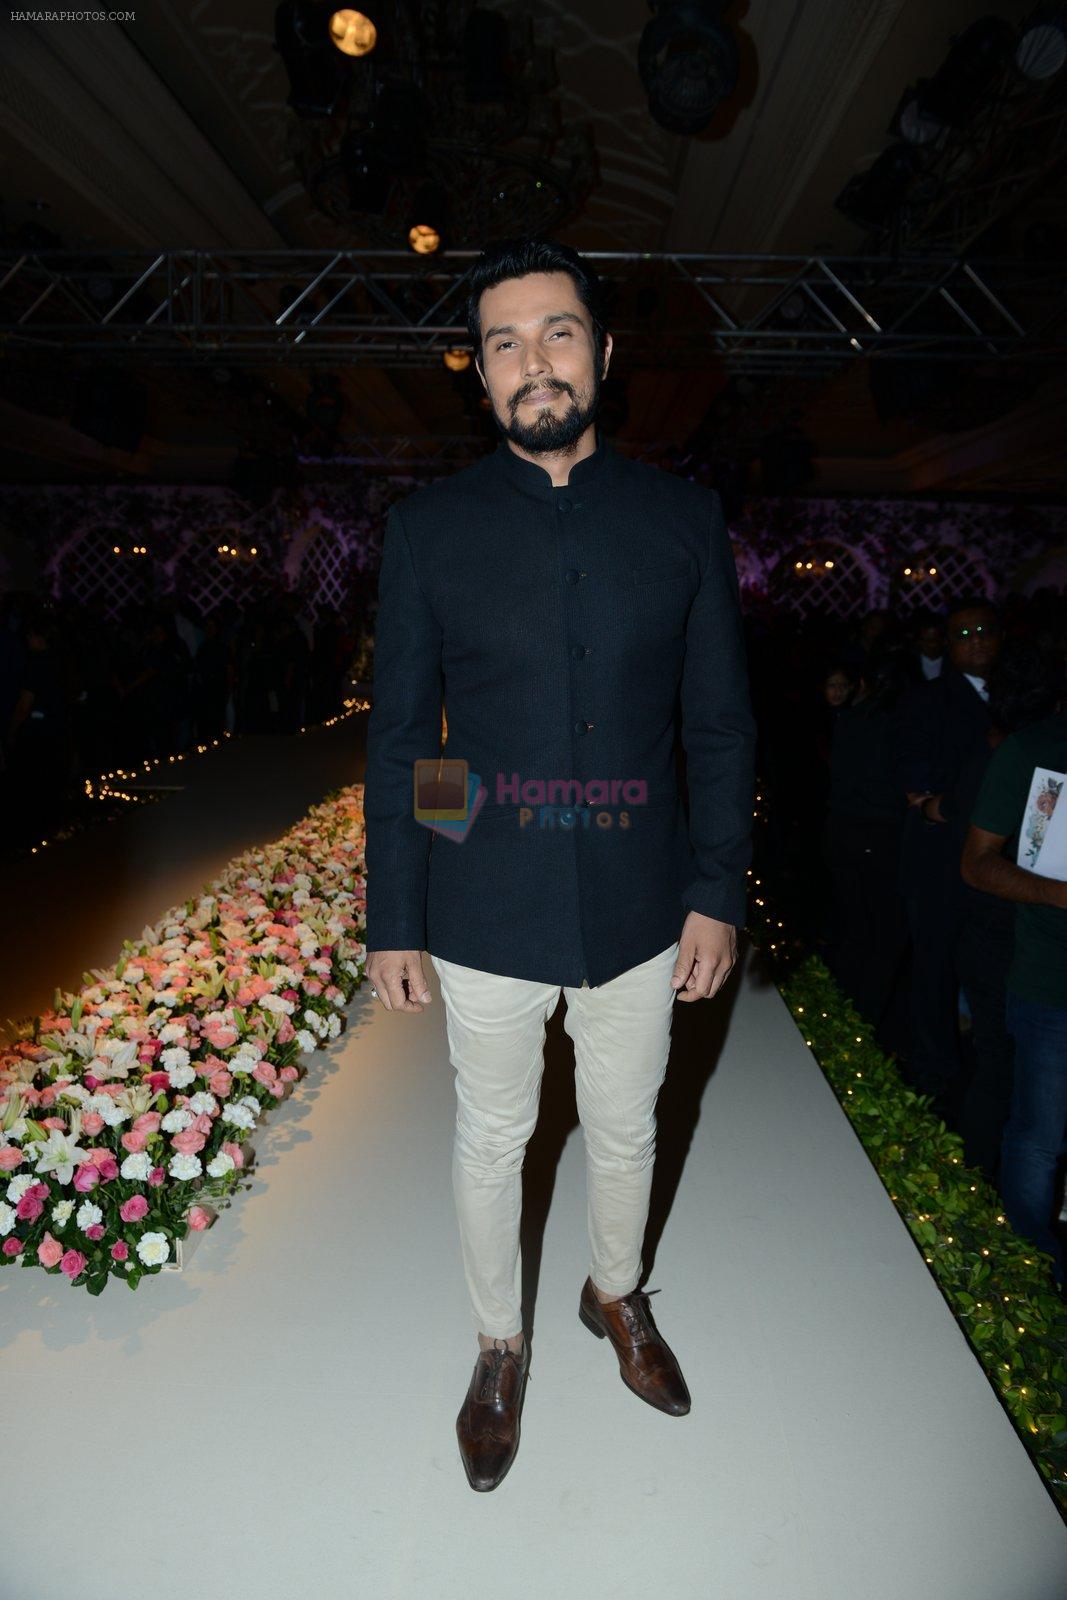 Randeep Hooda during Varun Bahl show Vintage Garden at the India Couture Week 2016, in New Delhi, India on July 23, 2016